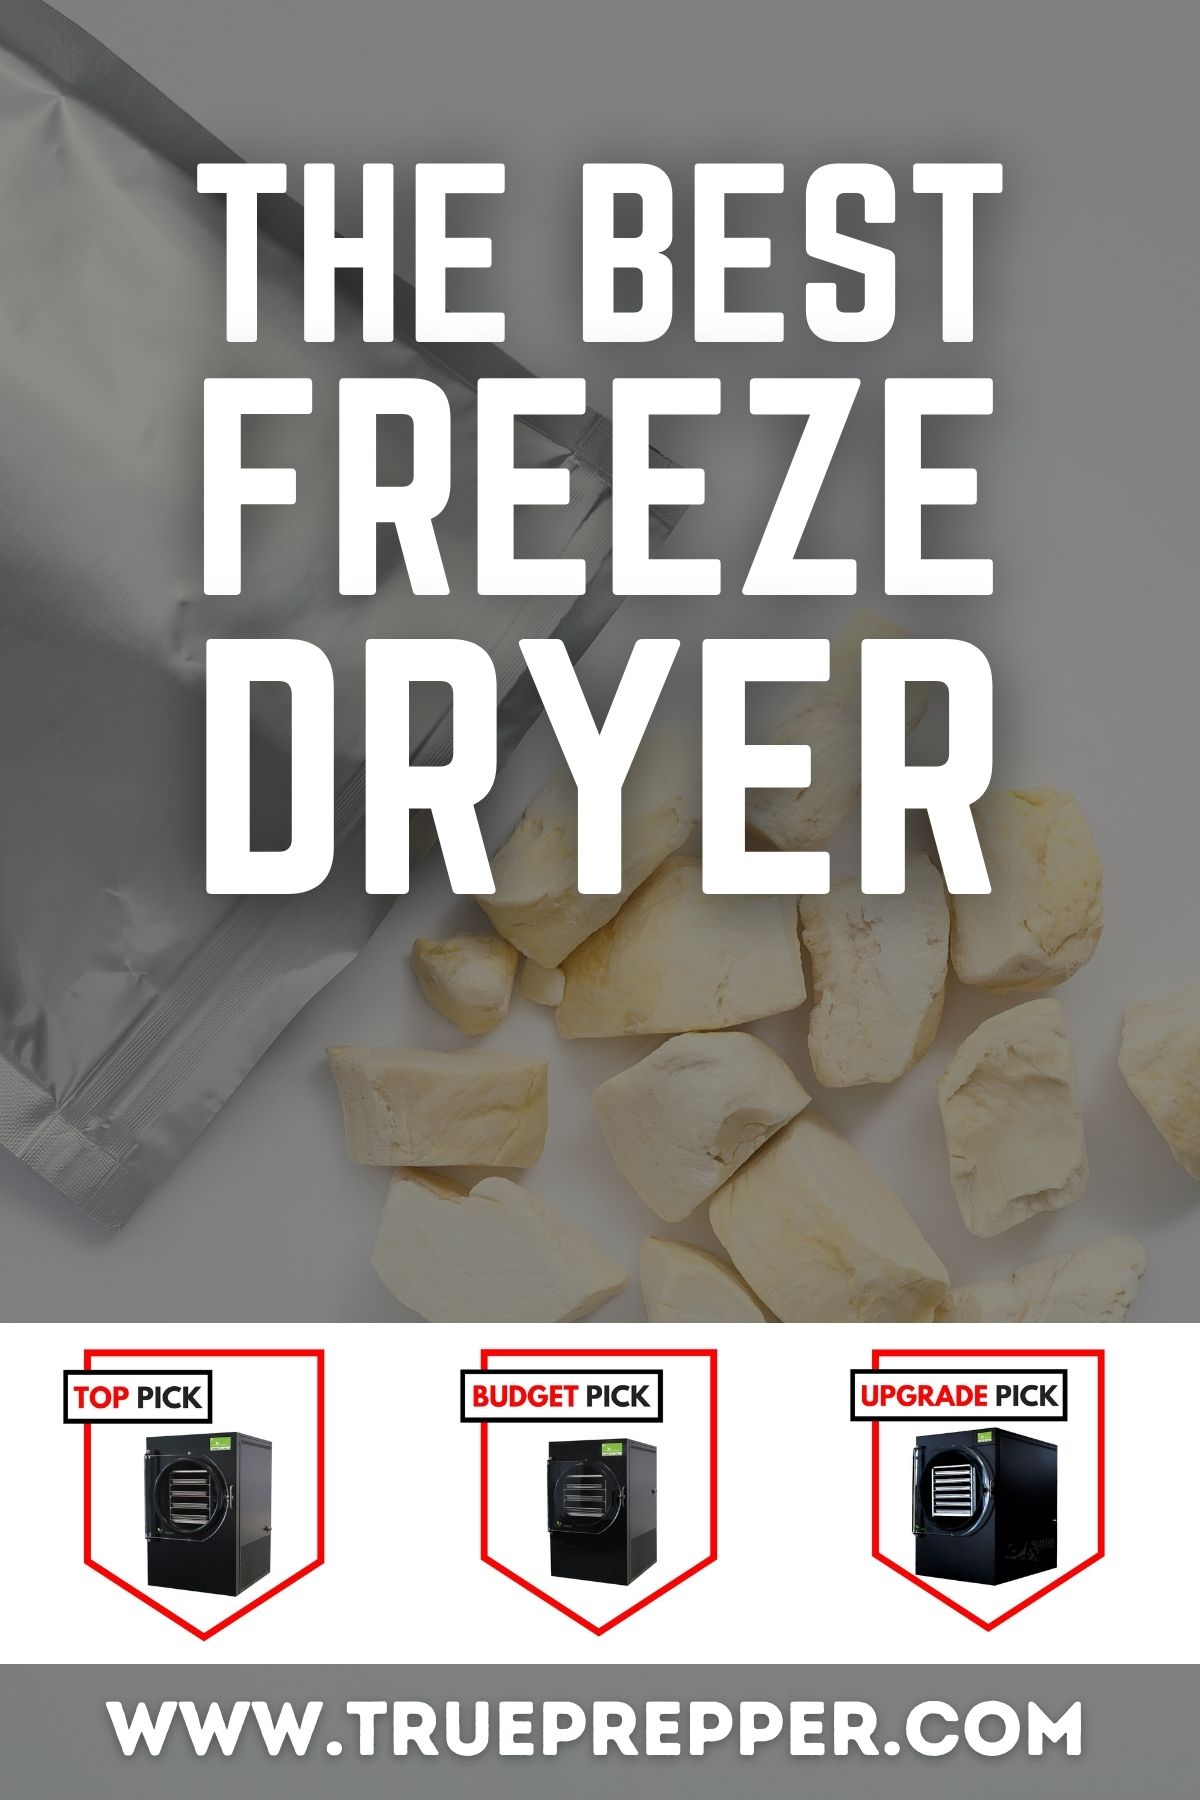 The Best Freeze Dryer for Drying Food at Home